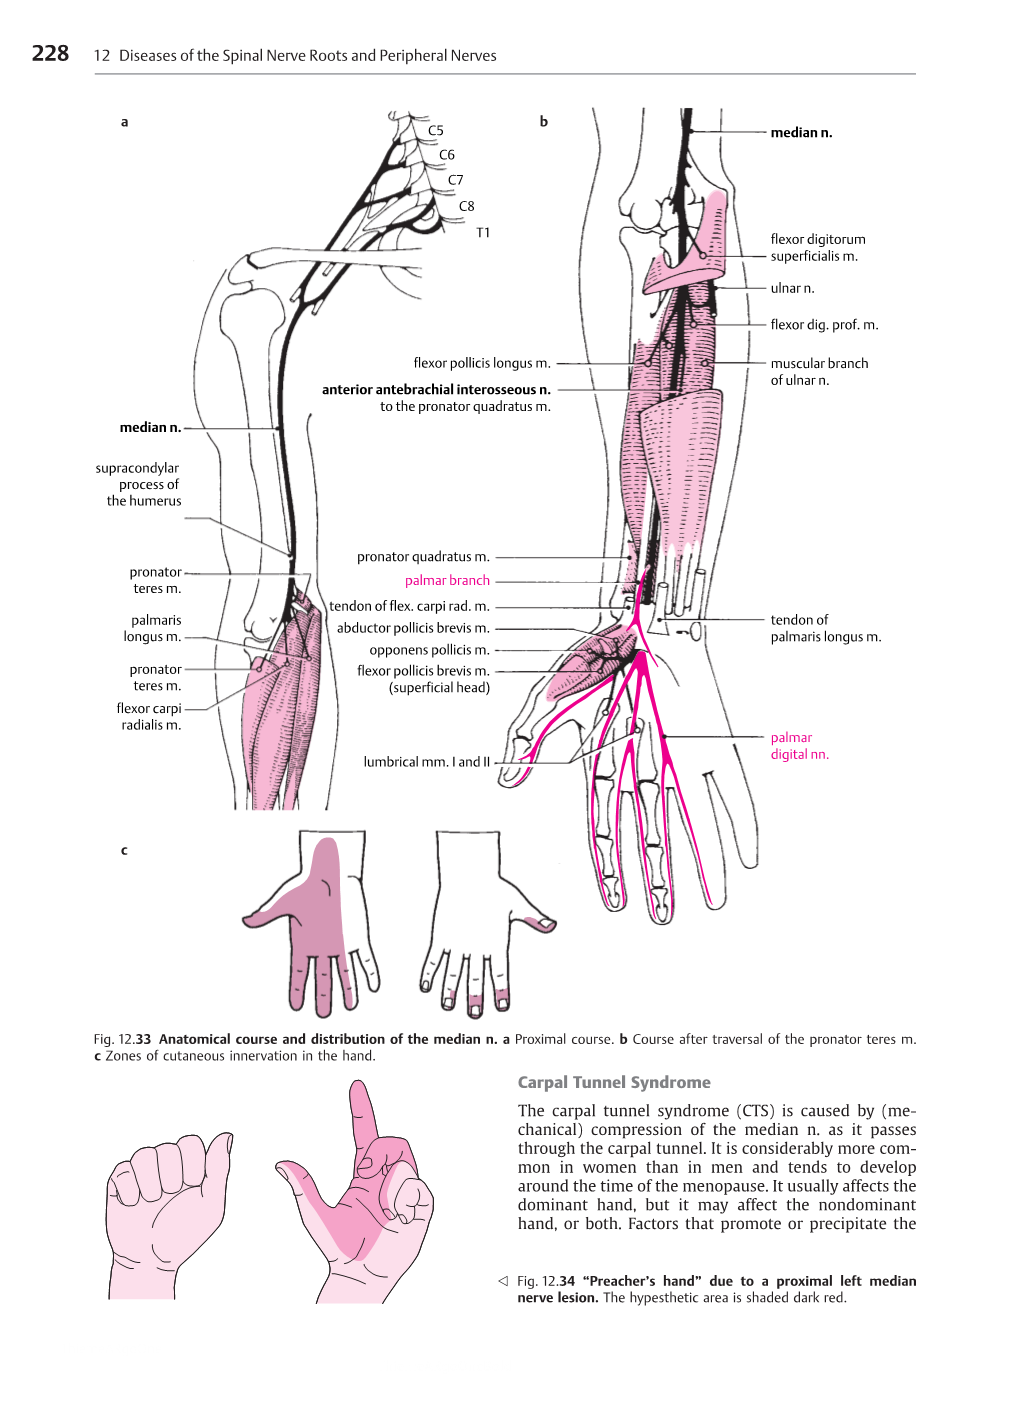 Carpal Tunnel Syndrome the Carpal Tunnel Syndrome (CTS) Is Caused by (Me- Chanical) Compression of the Median N